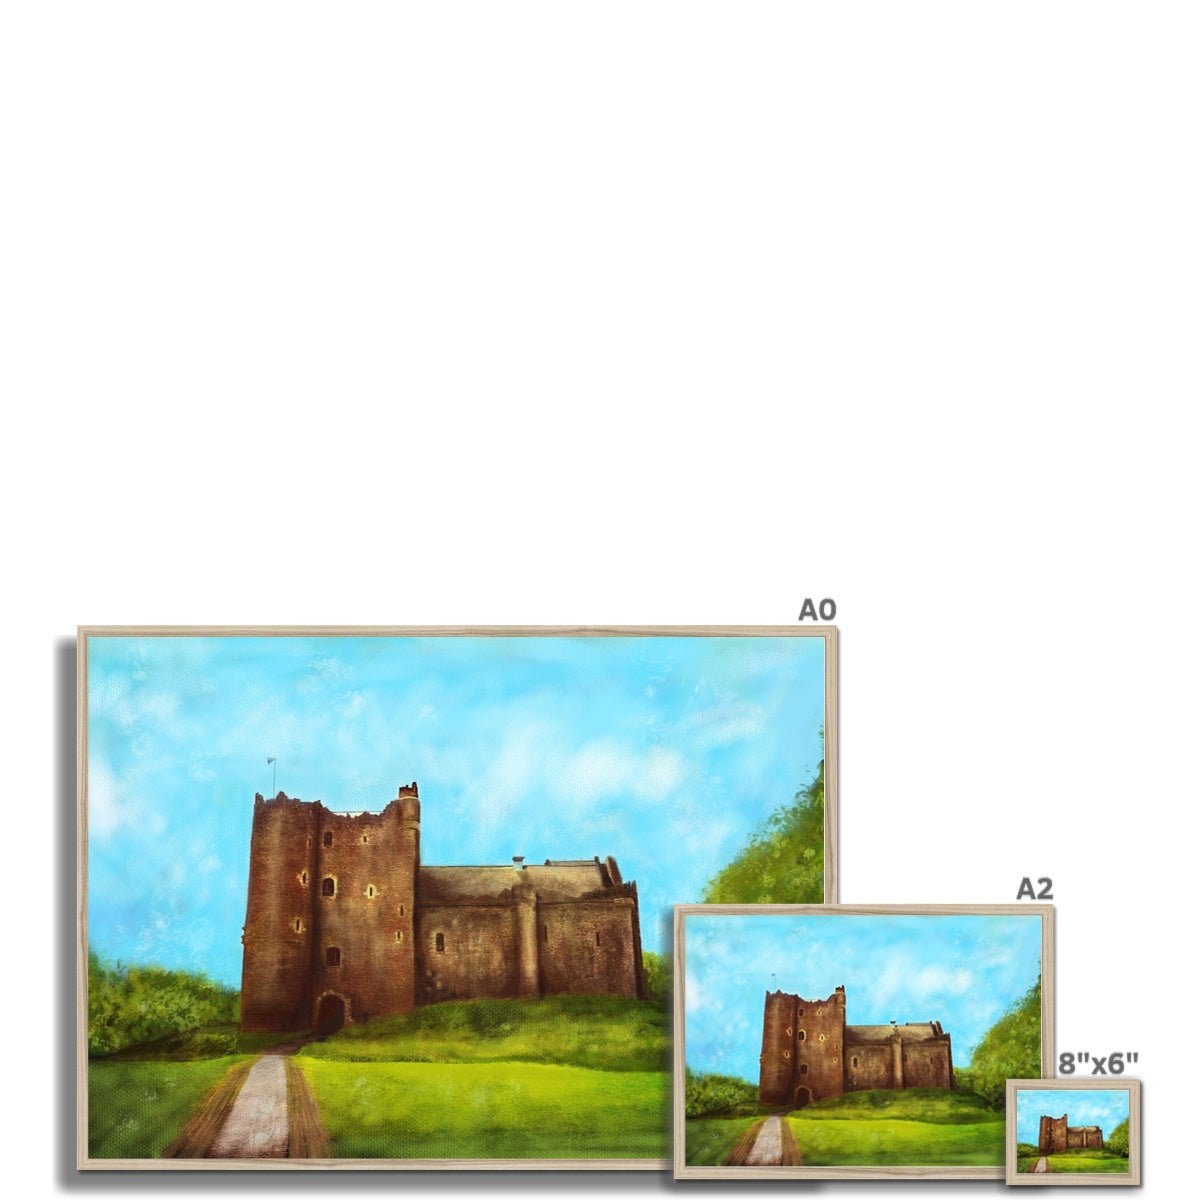 Doune Castle Painting | Framed Prints From Scotland-Framed Prints-Historic & Iconic Scotland Art Gallery-Paintings, Prints, Homeware, Art Gifts From Scotland By Scottish Artist Kevin Hunter